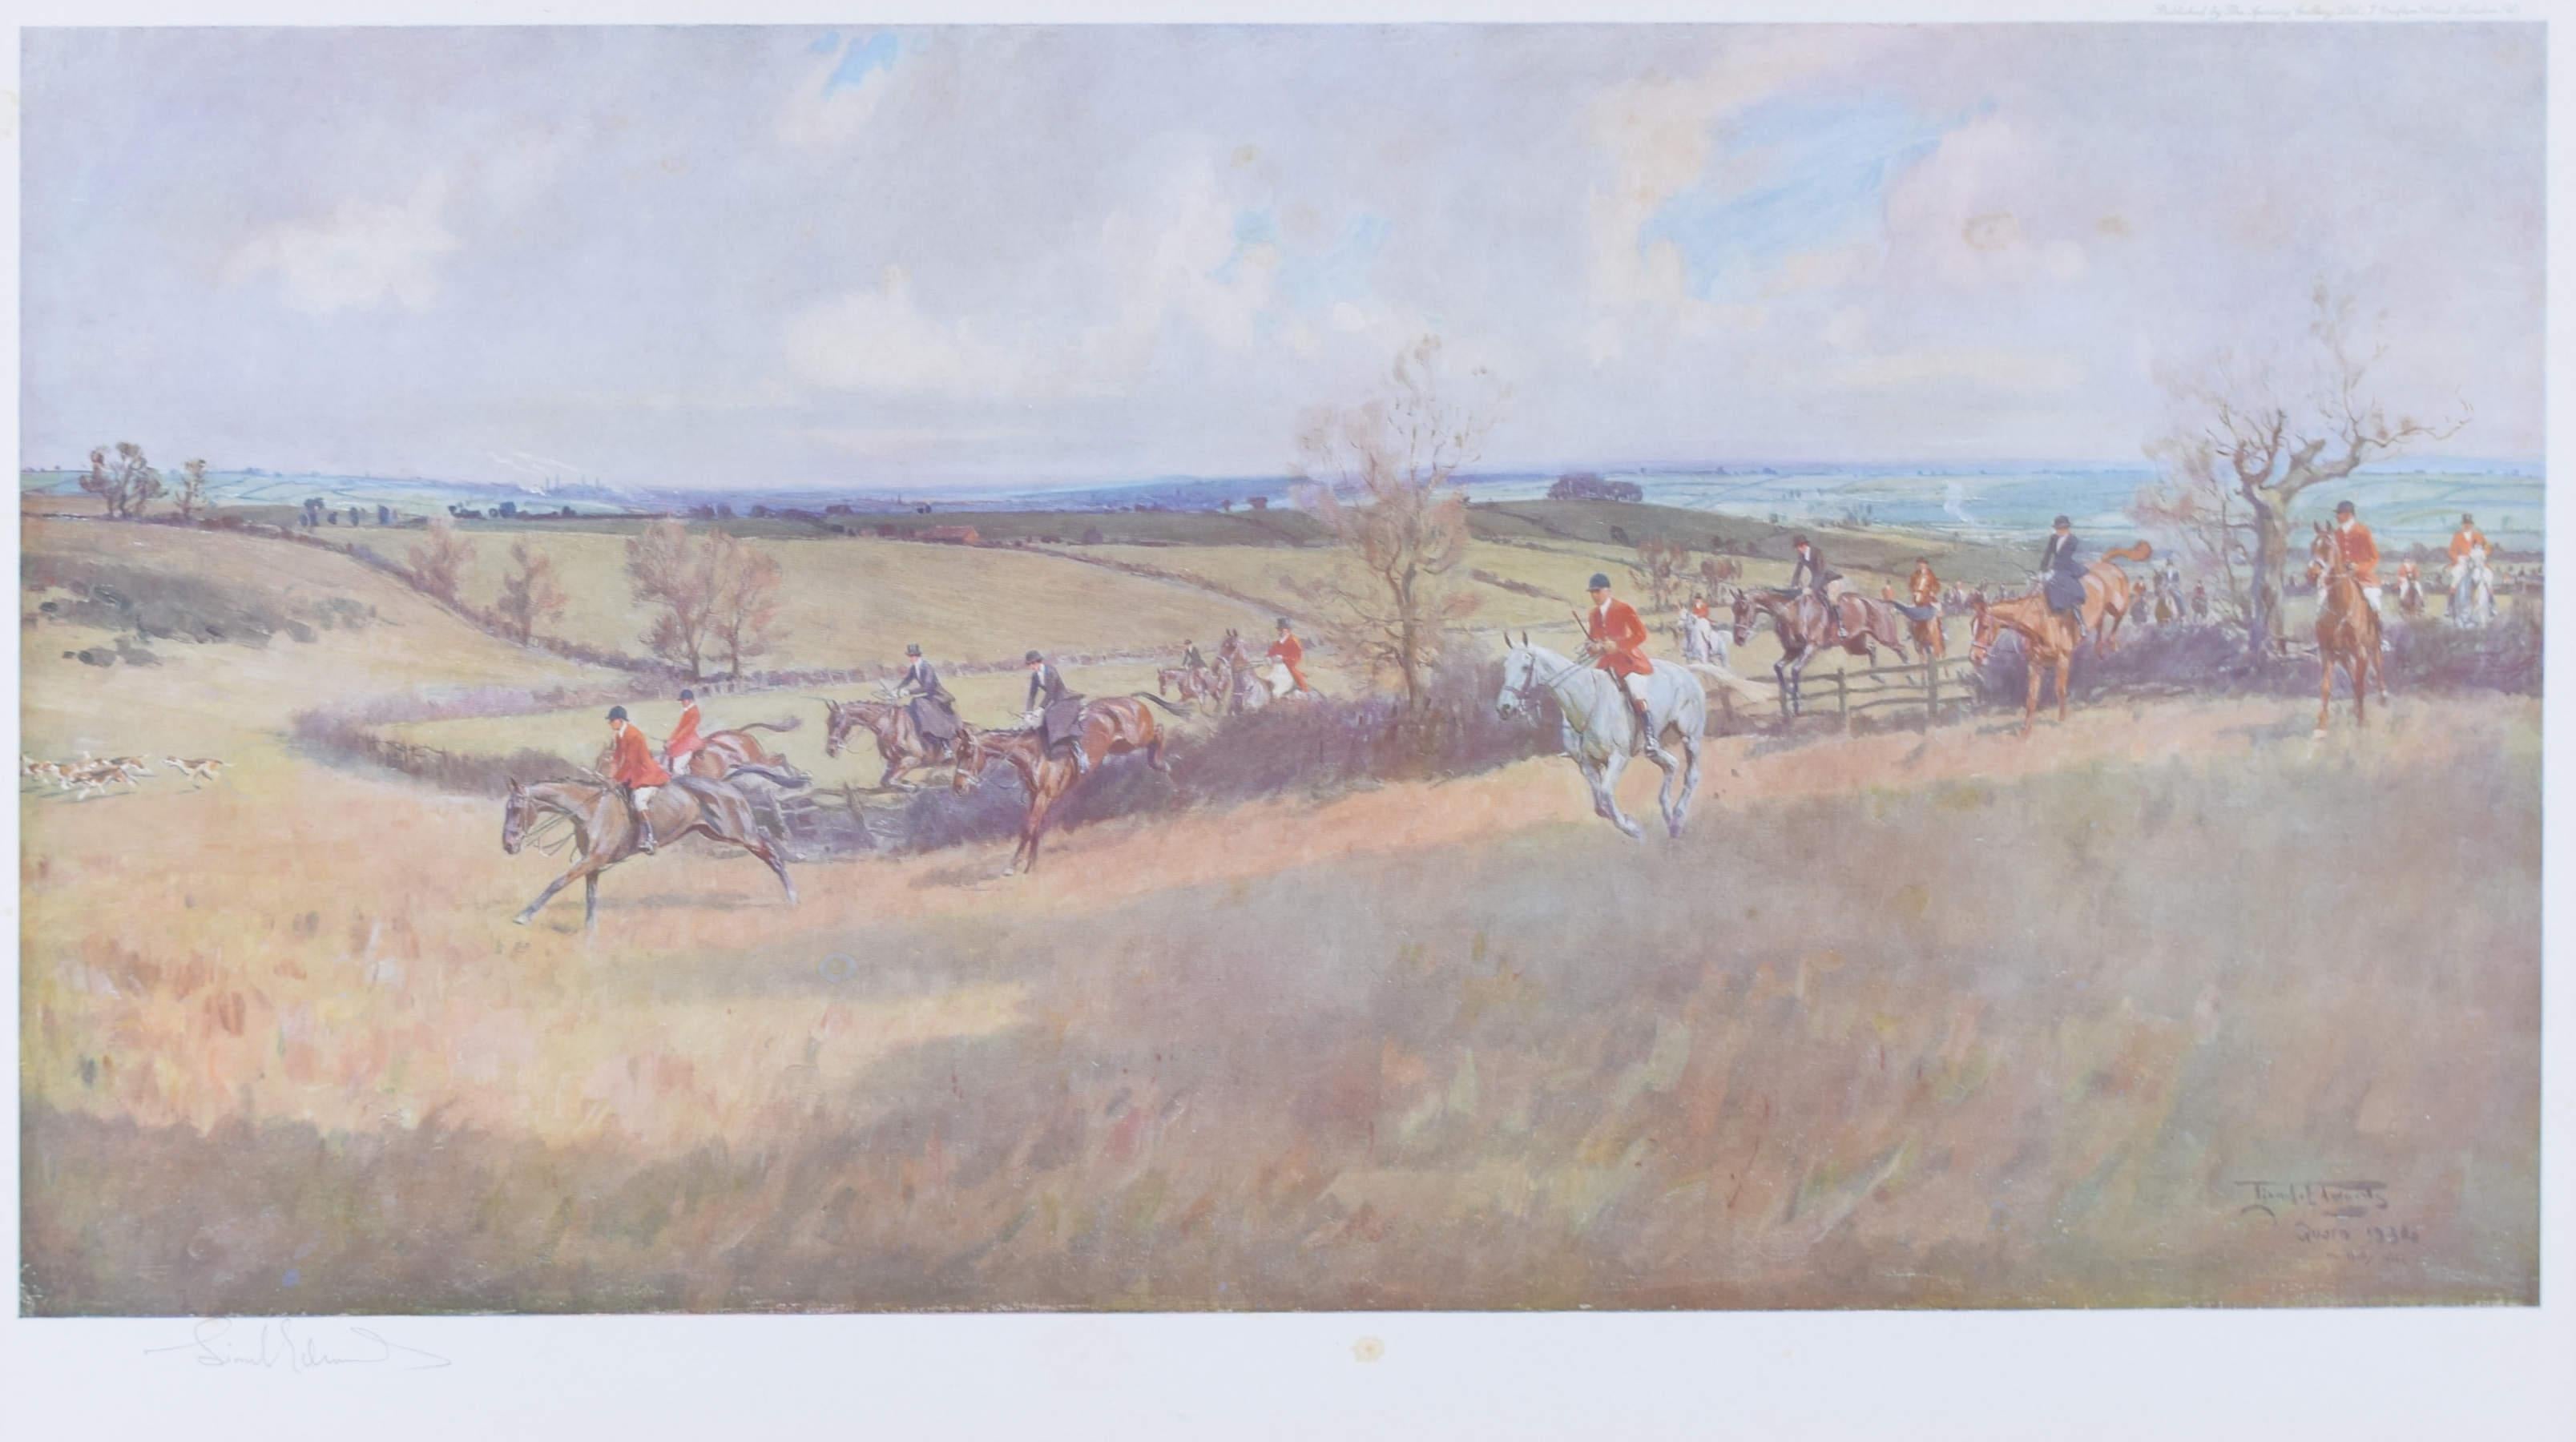 To see our other hunting pictures, scroll down to "More from this Seller" and below it click on "See all from this Seller" and then search.

Lionel Edwards (1878 - 1966)
The Quorn Hunt (1934)
Lithograph
34 x 62 cm

Signed, titled and dated in plate